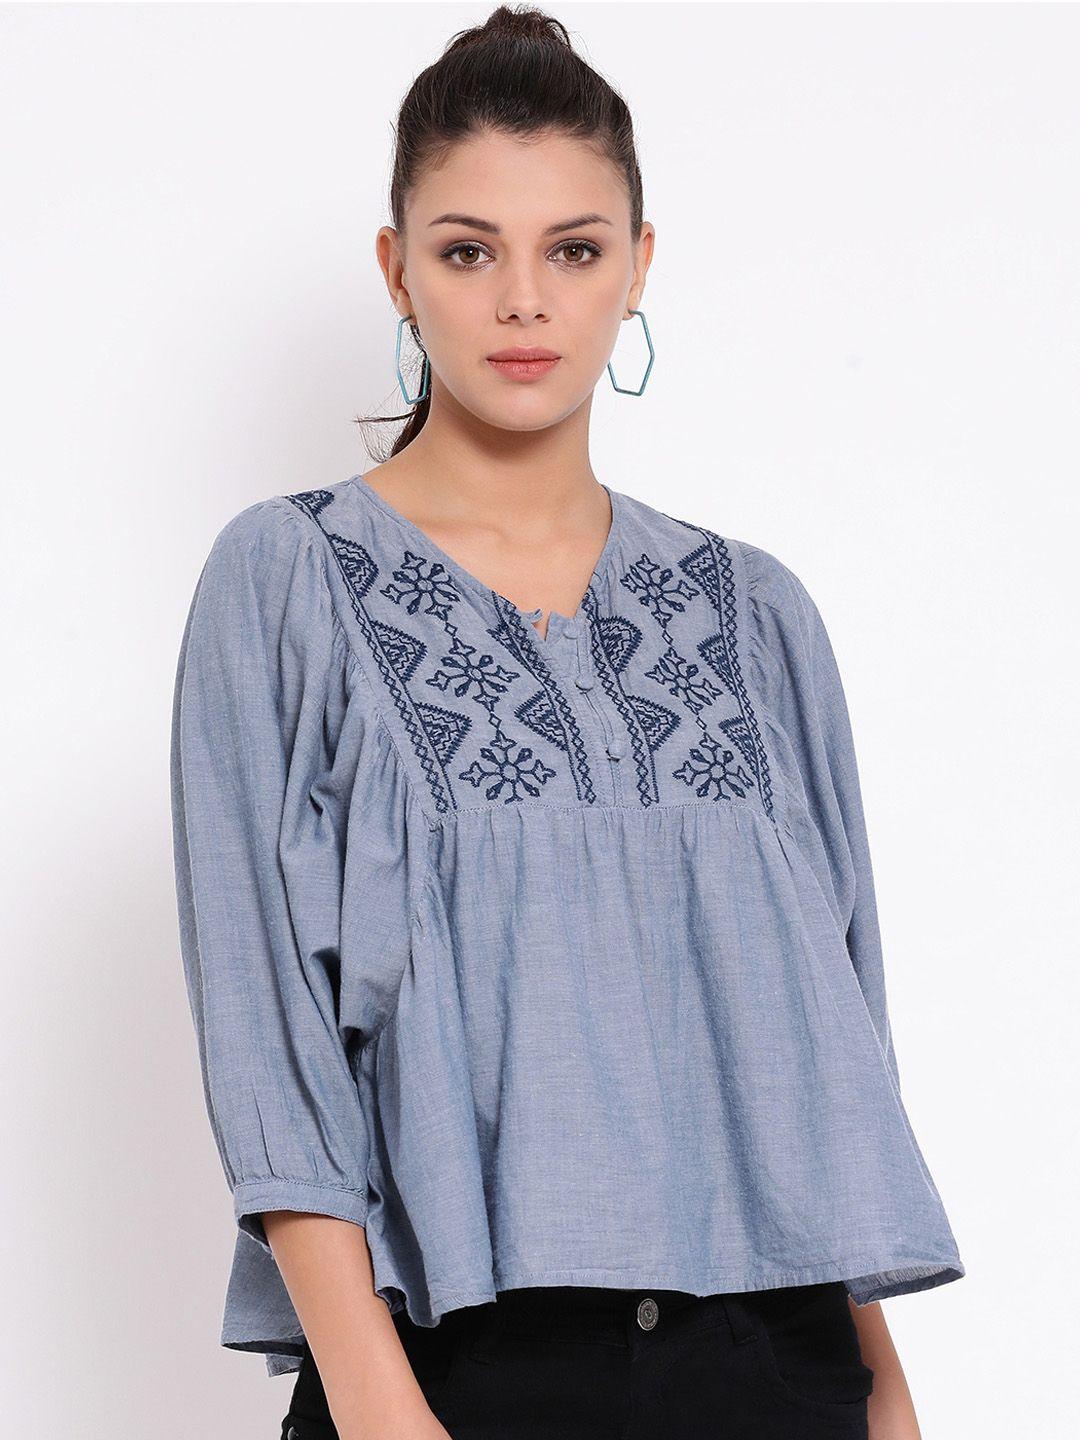 oxolloxo women grey printed high-low pure cotton top